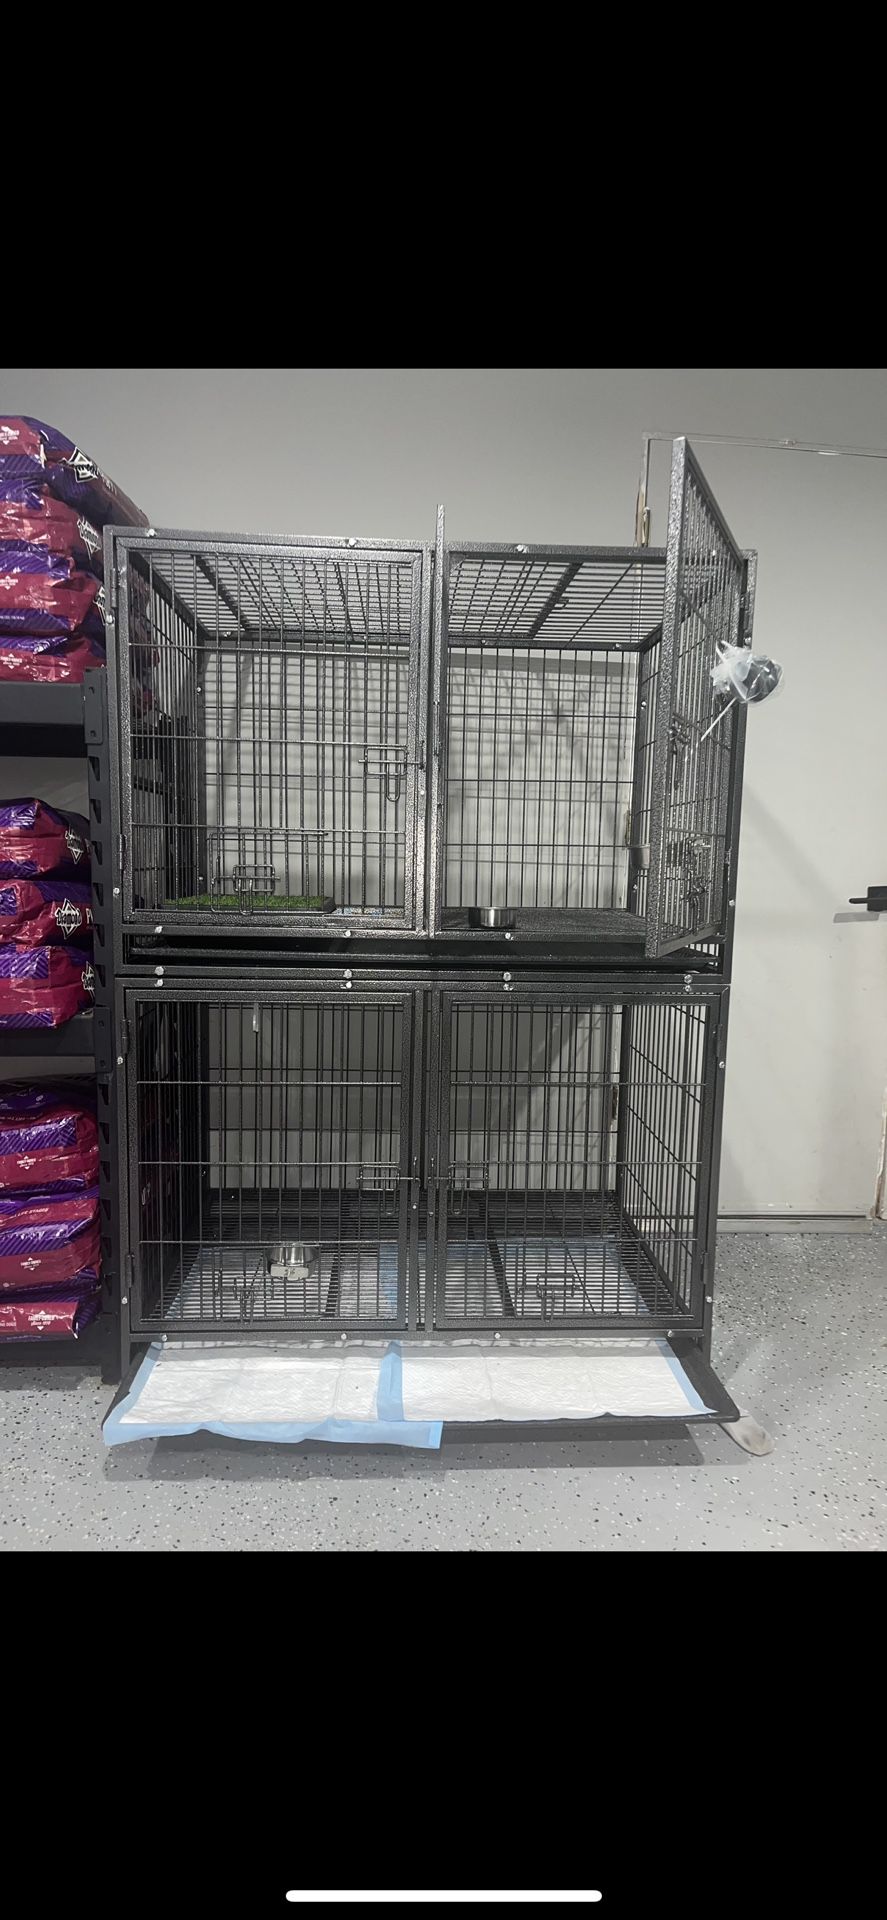 Homey Pets Kennels Crate • Progesterone Testing Reverse Pg Test • Ultrasounds • Vaccinations Deworming • Ai Tci • Victors Dog Food Diamond Puppy 